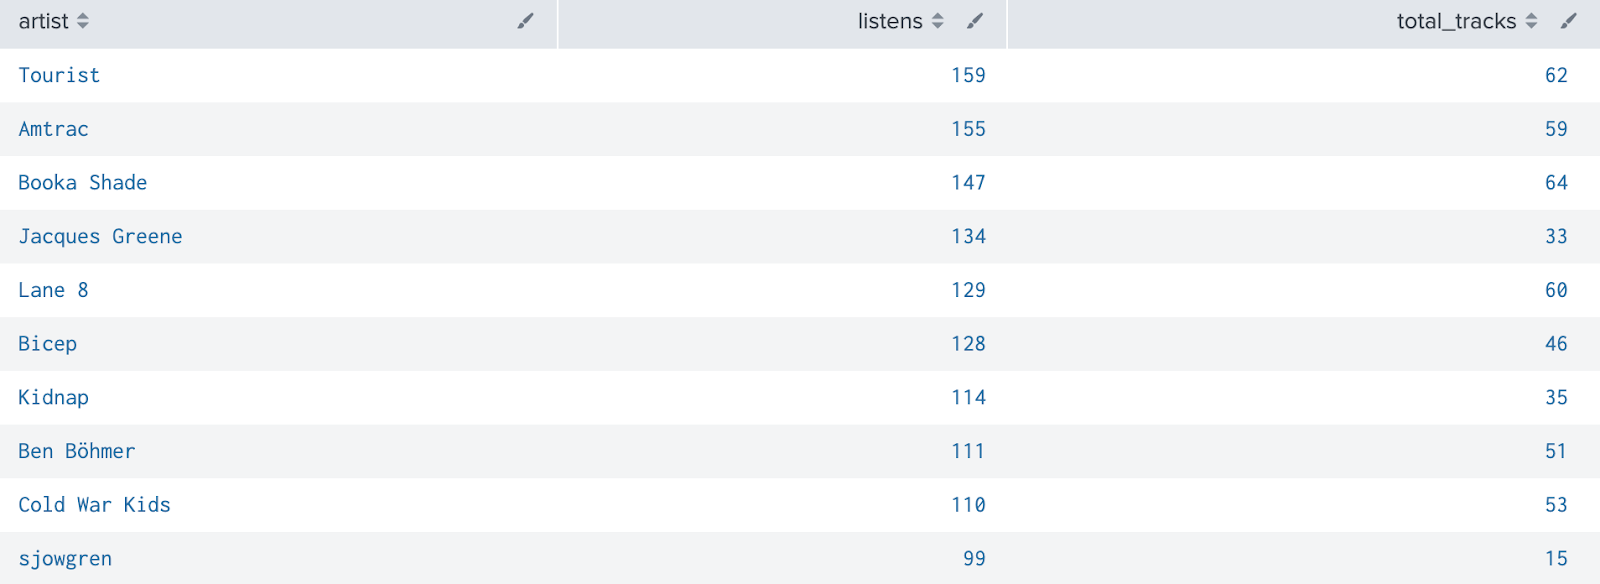 Table showing top 10 artists and total listens, with total tracks for each artist as well. Tourist has 62 tracks for 159 listens, Amtrac has 59 tracks for 155 listens, Booka Shade has 64 tracks for 147 listens, Jacques Greene has 33 tracks for 134 listens, Lane 8 has 60 tracks for 129 listens, Bicep has 46 tracks for 128 listens, Kidnap has 35 tracks for 114 listens, Ben Böhmer has 51 tracks for 111 listens, Cold War Kids has 53 tracks for 110 listens, and sjowgren has 15 tracks for 99 listens.